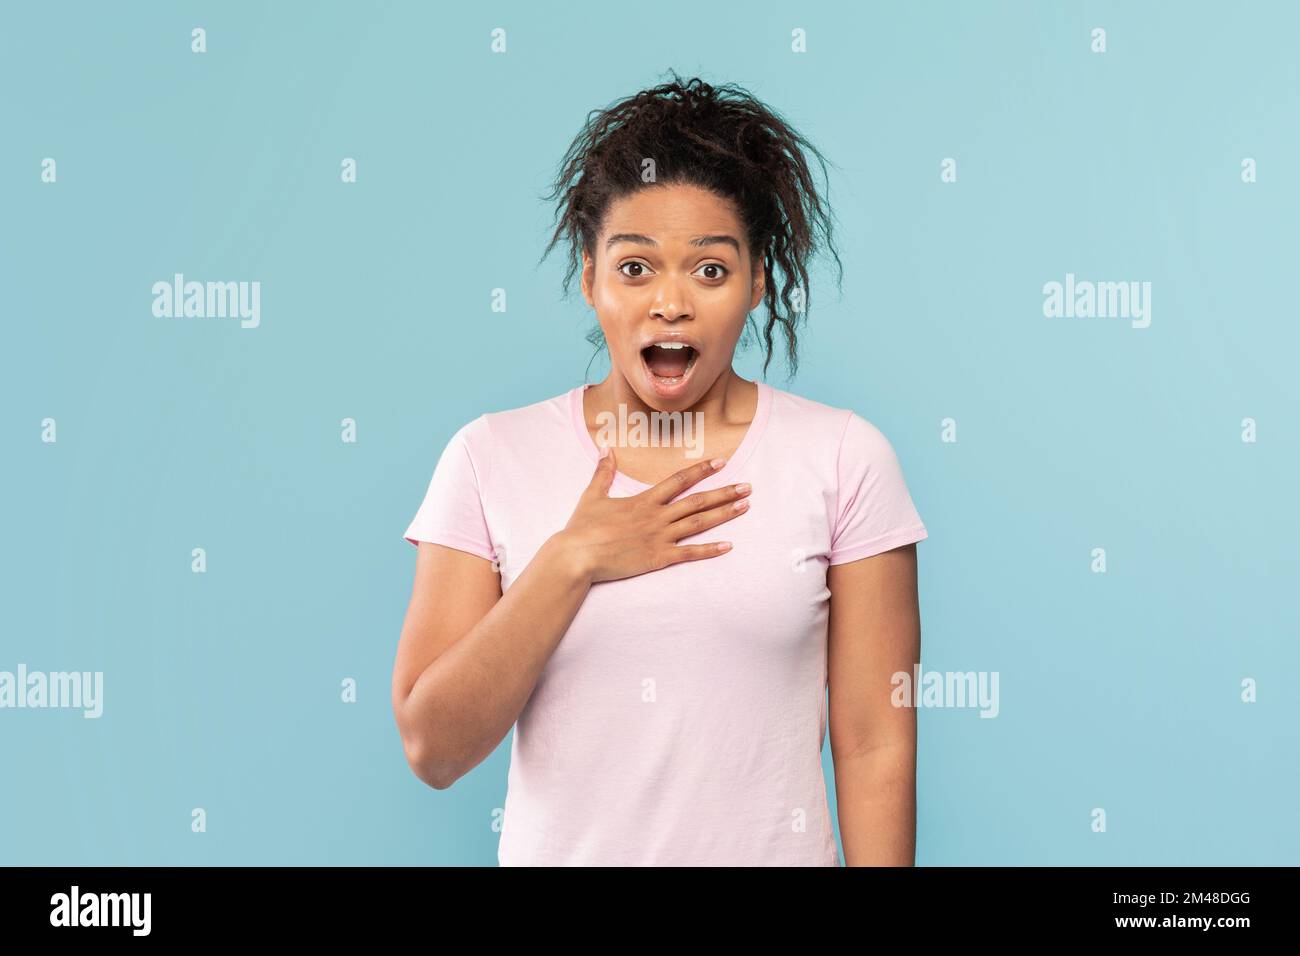 Shocked black lady touching chest and looking at camera in surprise over blue background, amazing promo Stock Photo